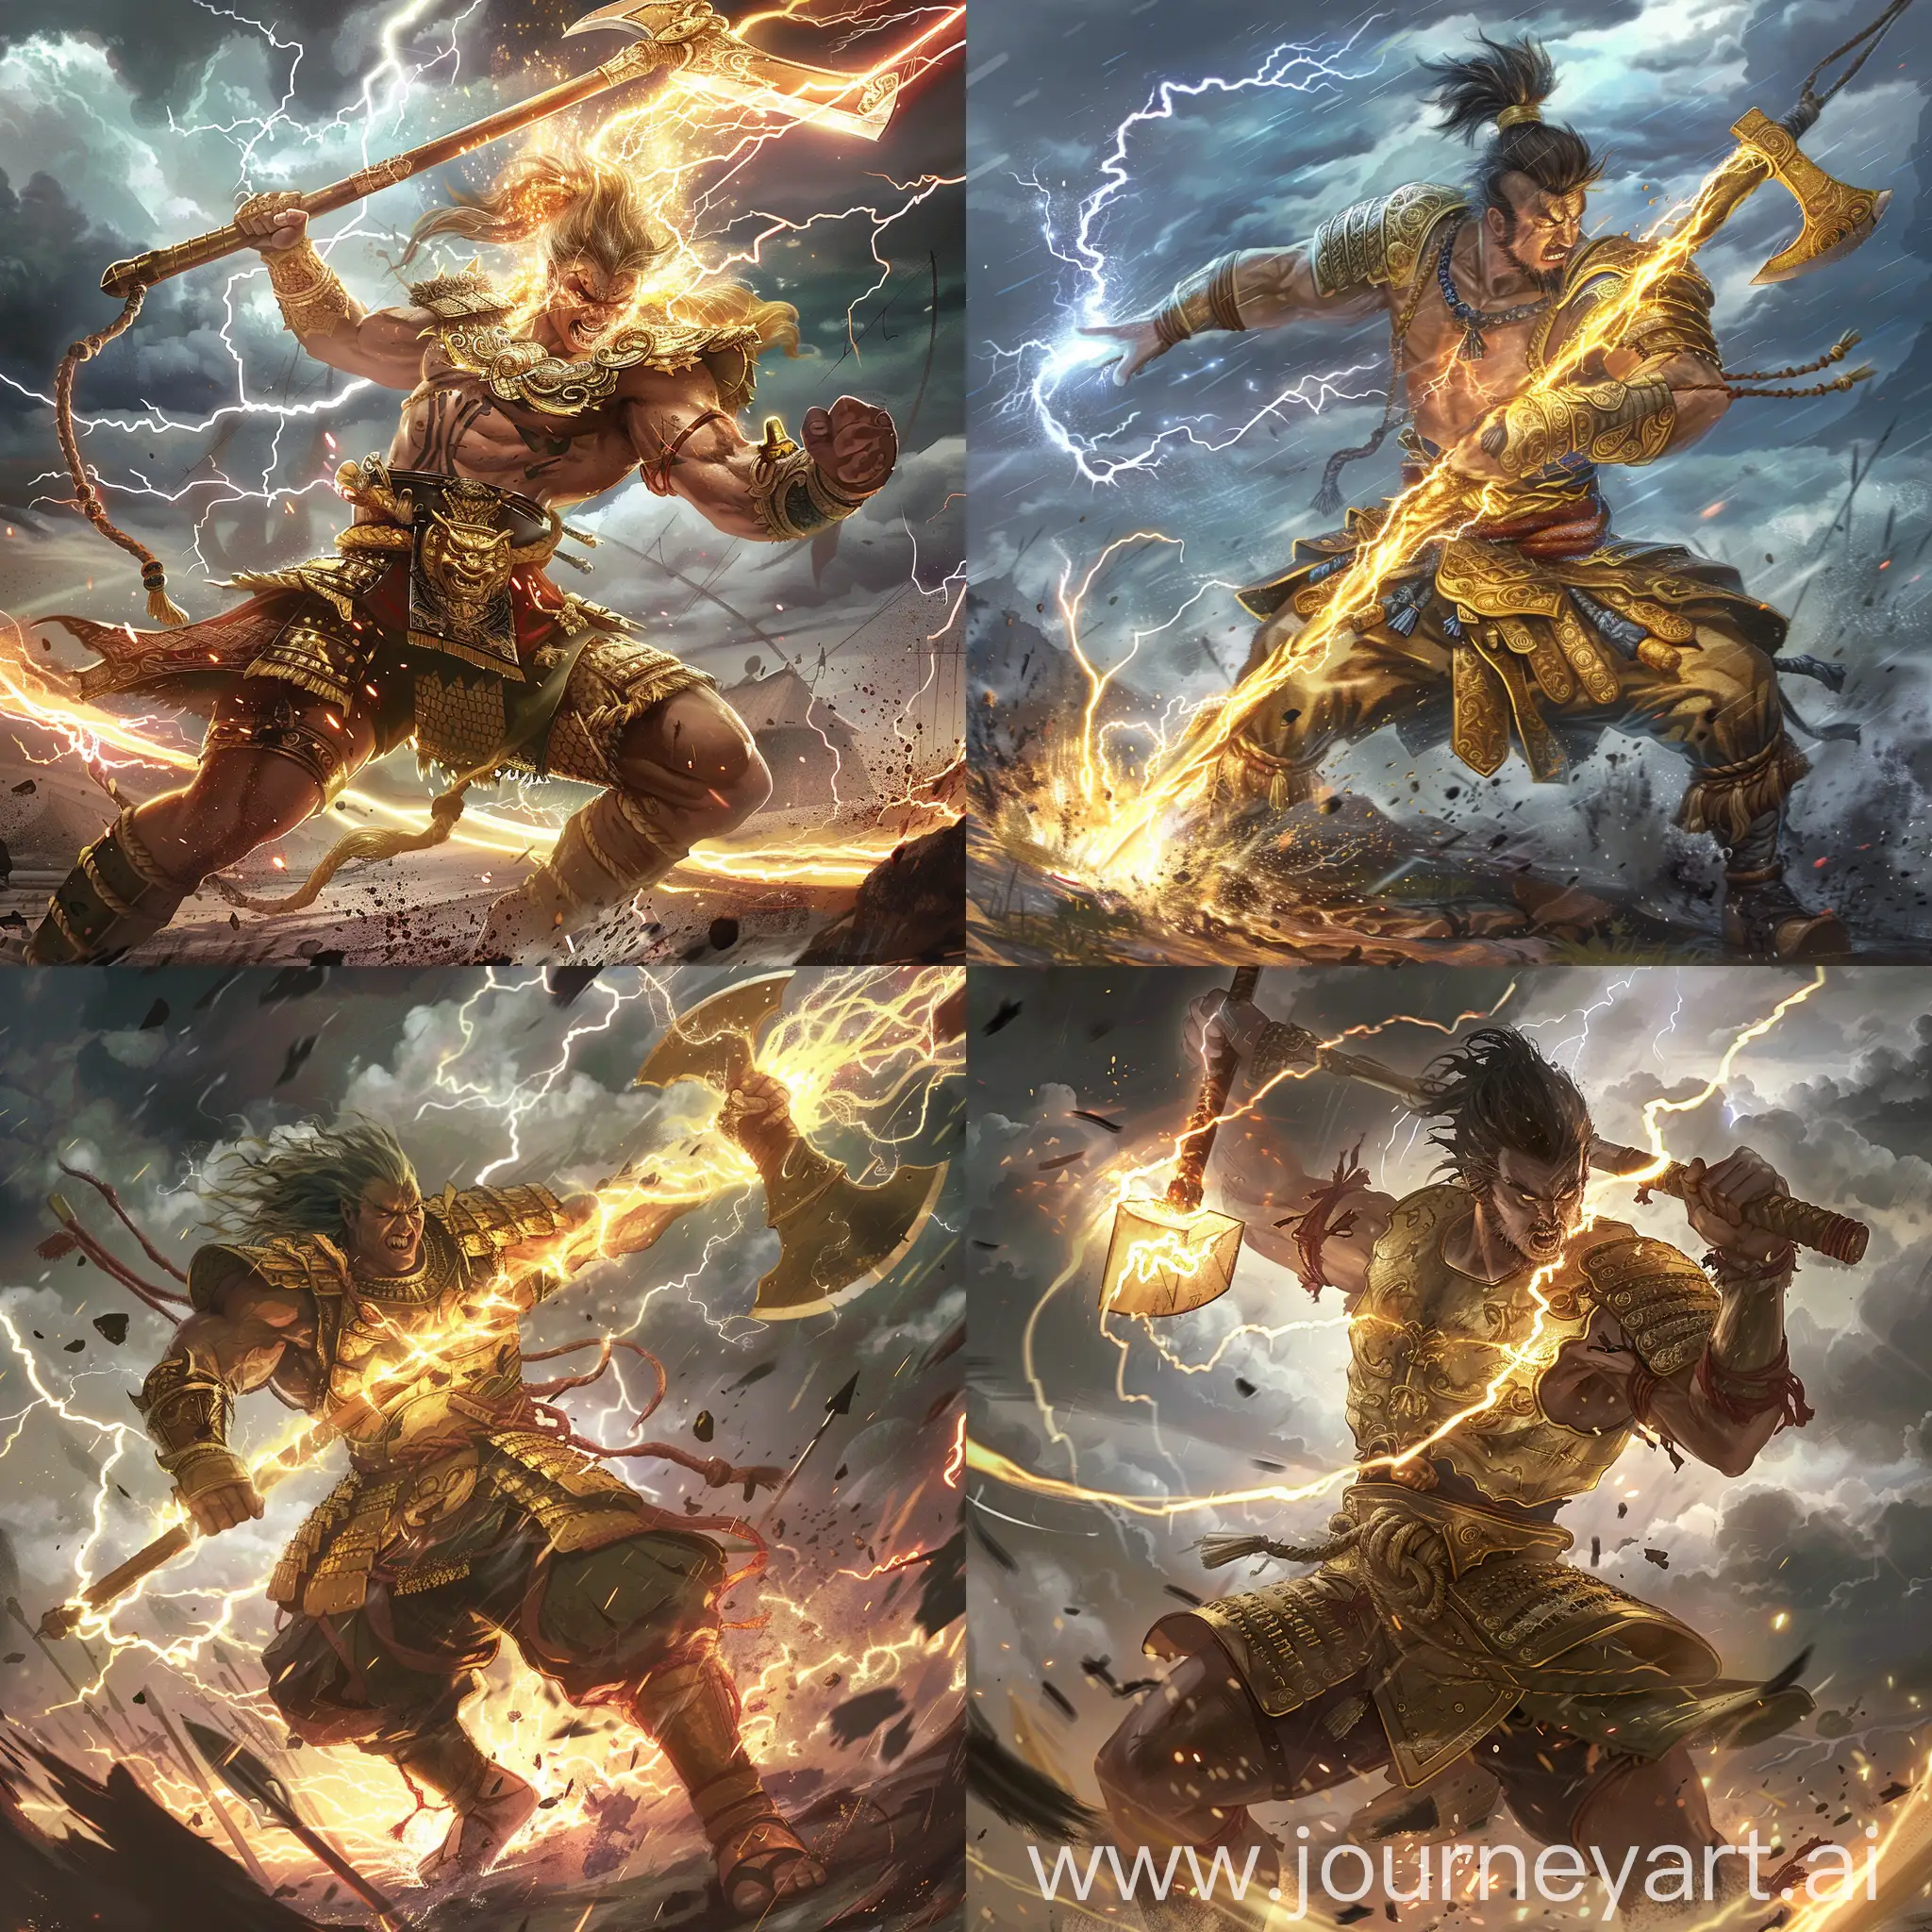 
2D Anime Visualize a heroic scene from ancient legends: Sakata Kintoki, a formidable warrior endowed with divine strength, is captured in the decisive moment of executing his Thunderbolt Throw. Clad in traditional armor that gleams with a golden hue, his muscles tensed with effort, Kintoki is in the process of hurling his legendary axe. This weapon, surrounded by a crackling aura of lightning, embodies the power of a tempest, its blade aglow as if forged from the very essence of a thunderstorm. The setting is a battlefield steeped in the chaos of war, under a brooding sky from which dark clouds and fierce winds swirl around, mirroring the tumultuous energy of Kintoki's attack. The scene is charged with the dynamic tension of a mythic duel, where every detail of Kintoki's determined expression, the electrified atmosphere, and the storm-battered landscape contributes to the sense of an epic moment frozen in time."